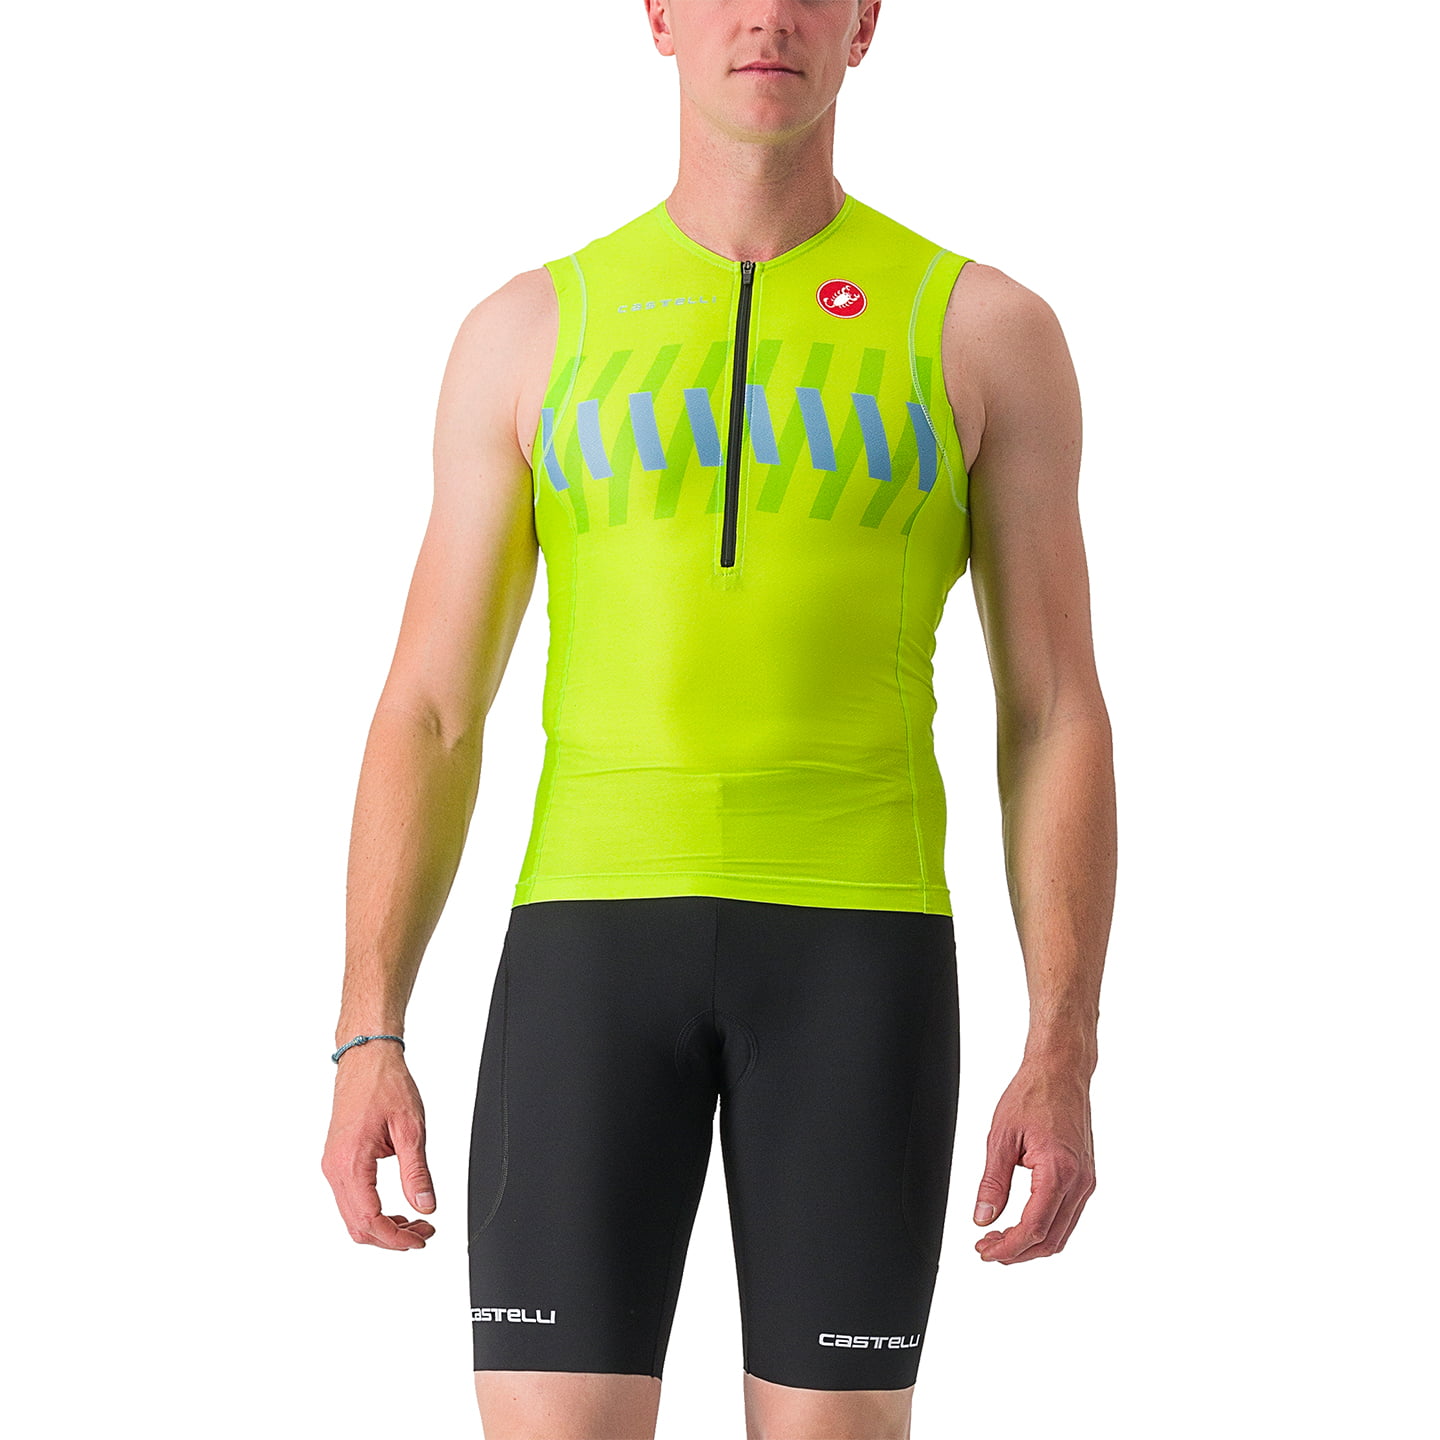 CASTELLI Free 2 Set (cycling jersey + cycling shorts) Set (2 pieces), for men